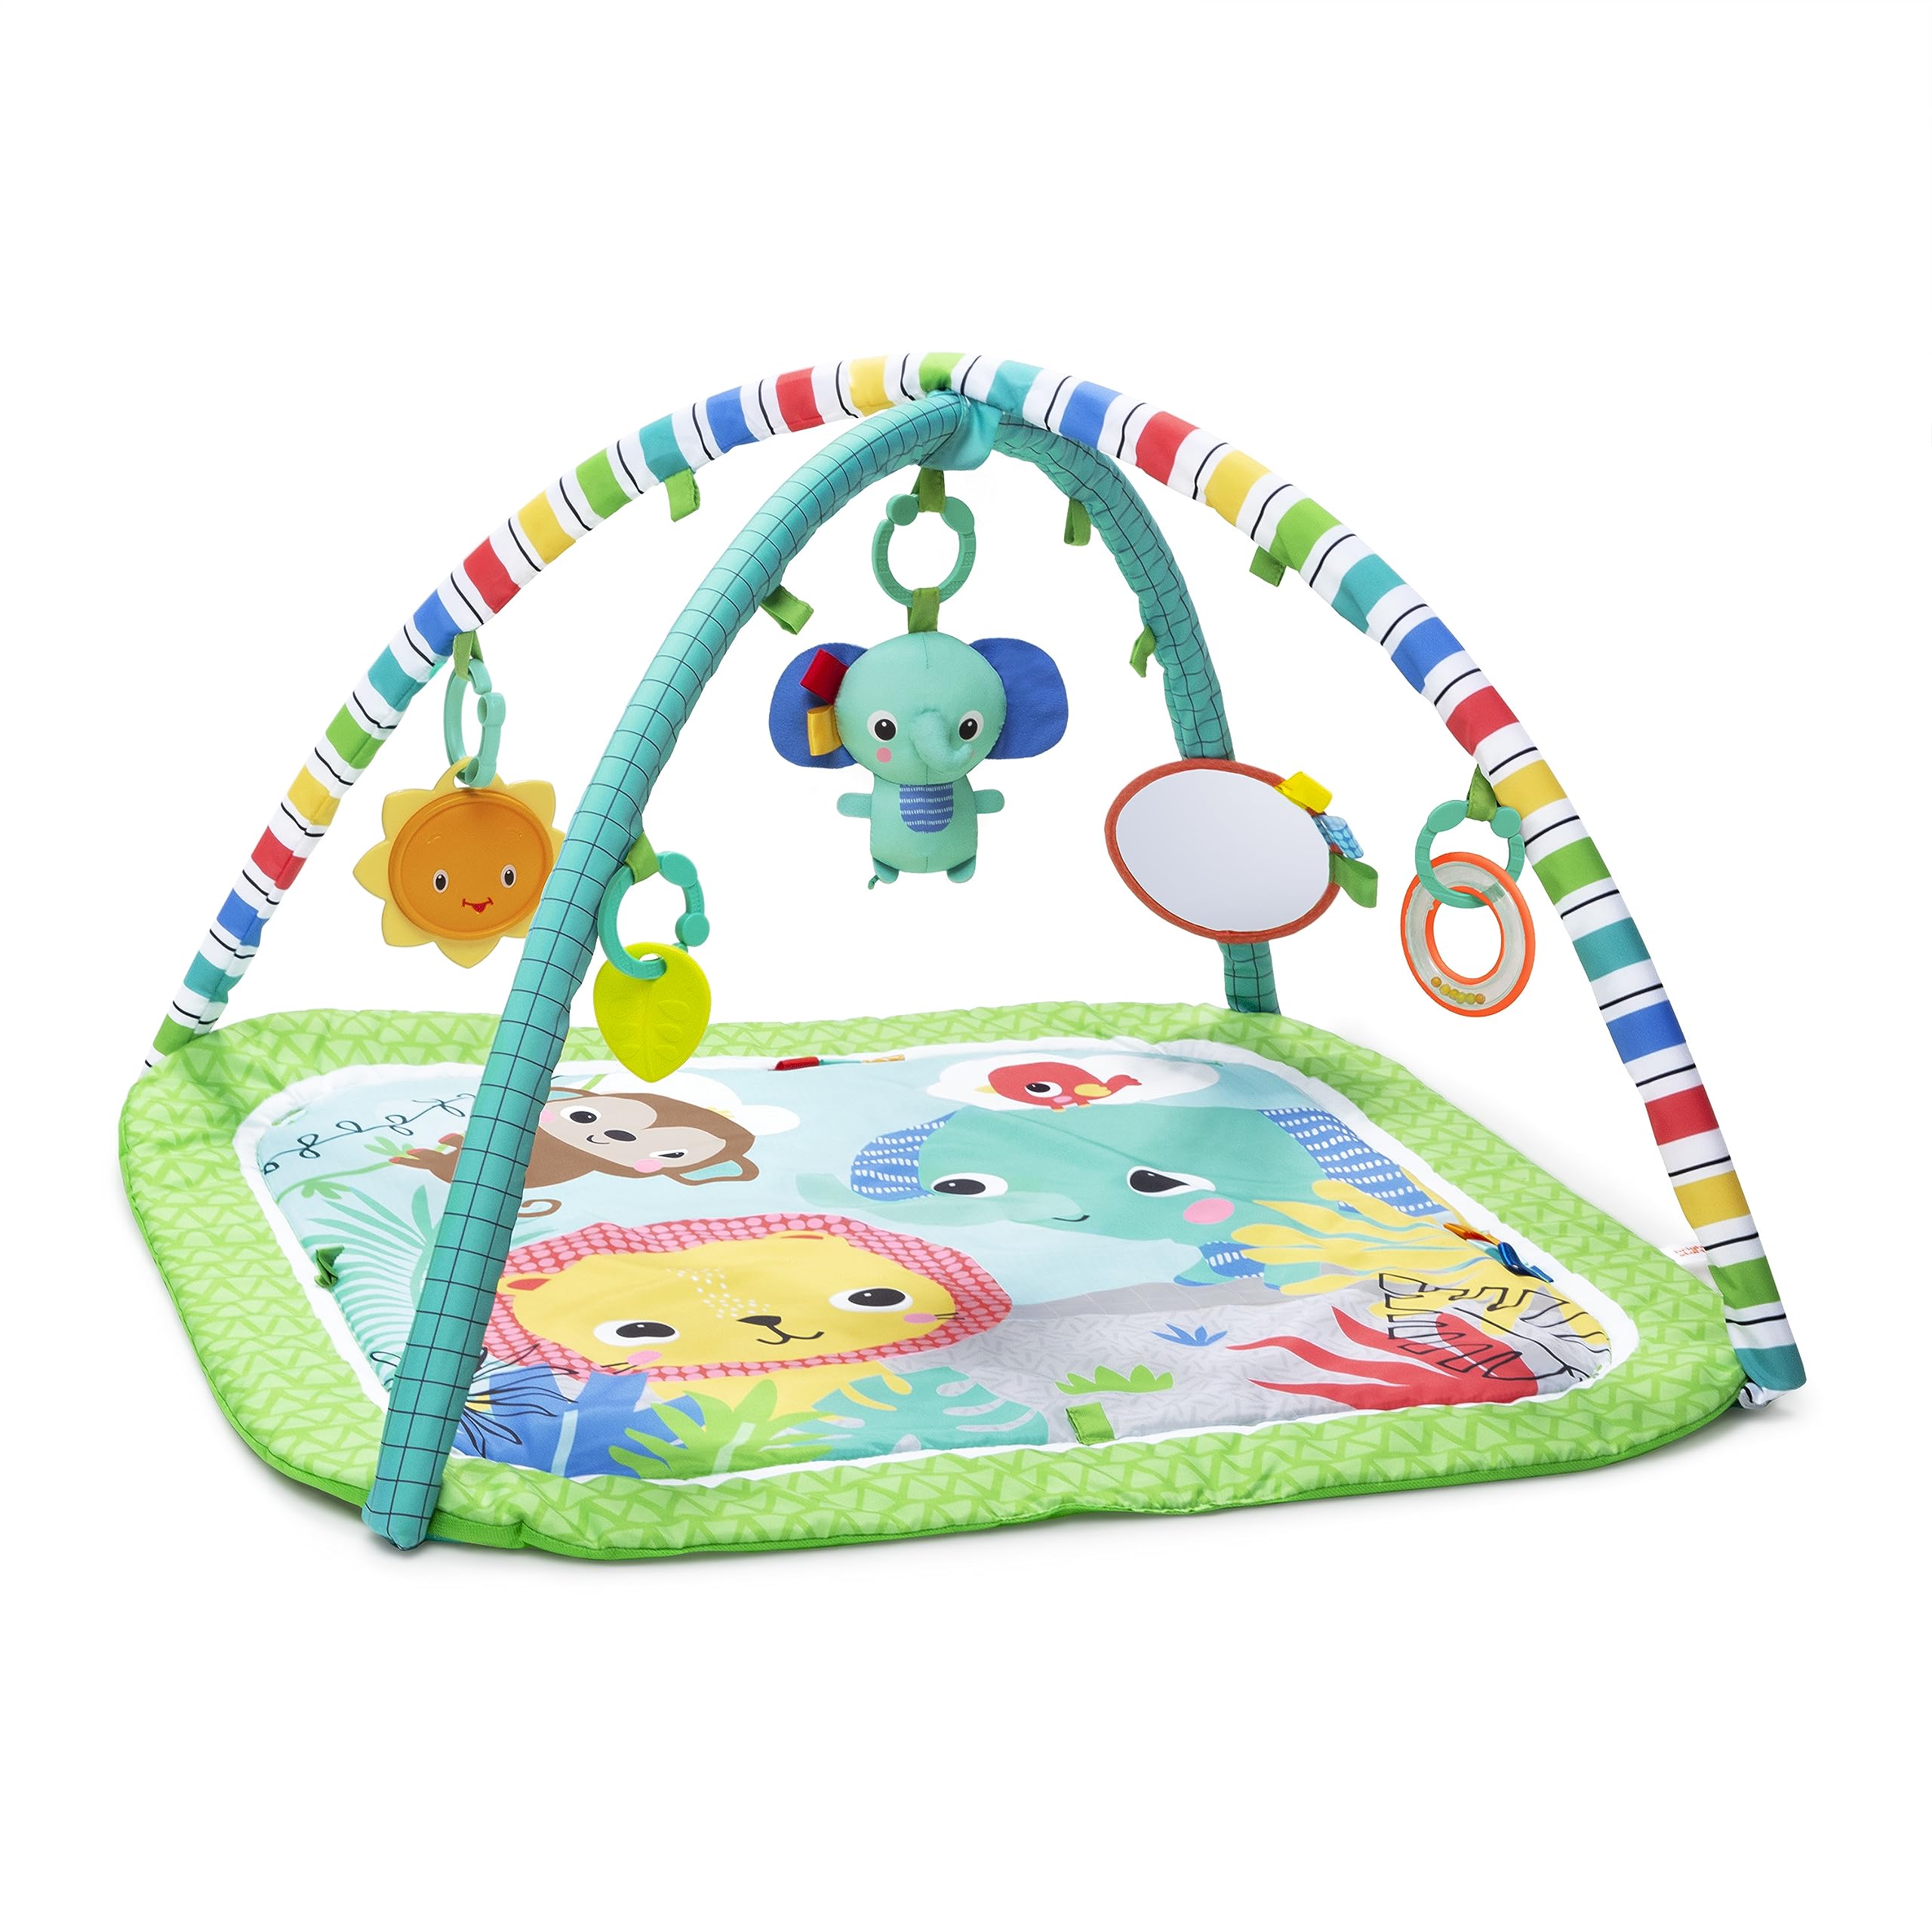 Bright Starts Wild Wiggles Baby Activity Gym & Play Mat with FoldingToy bar, Newborn and up - Green, 18.5” x 29.1” x 29.1”